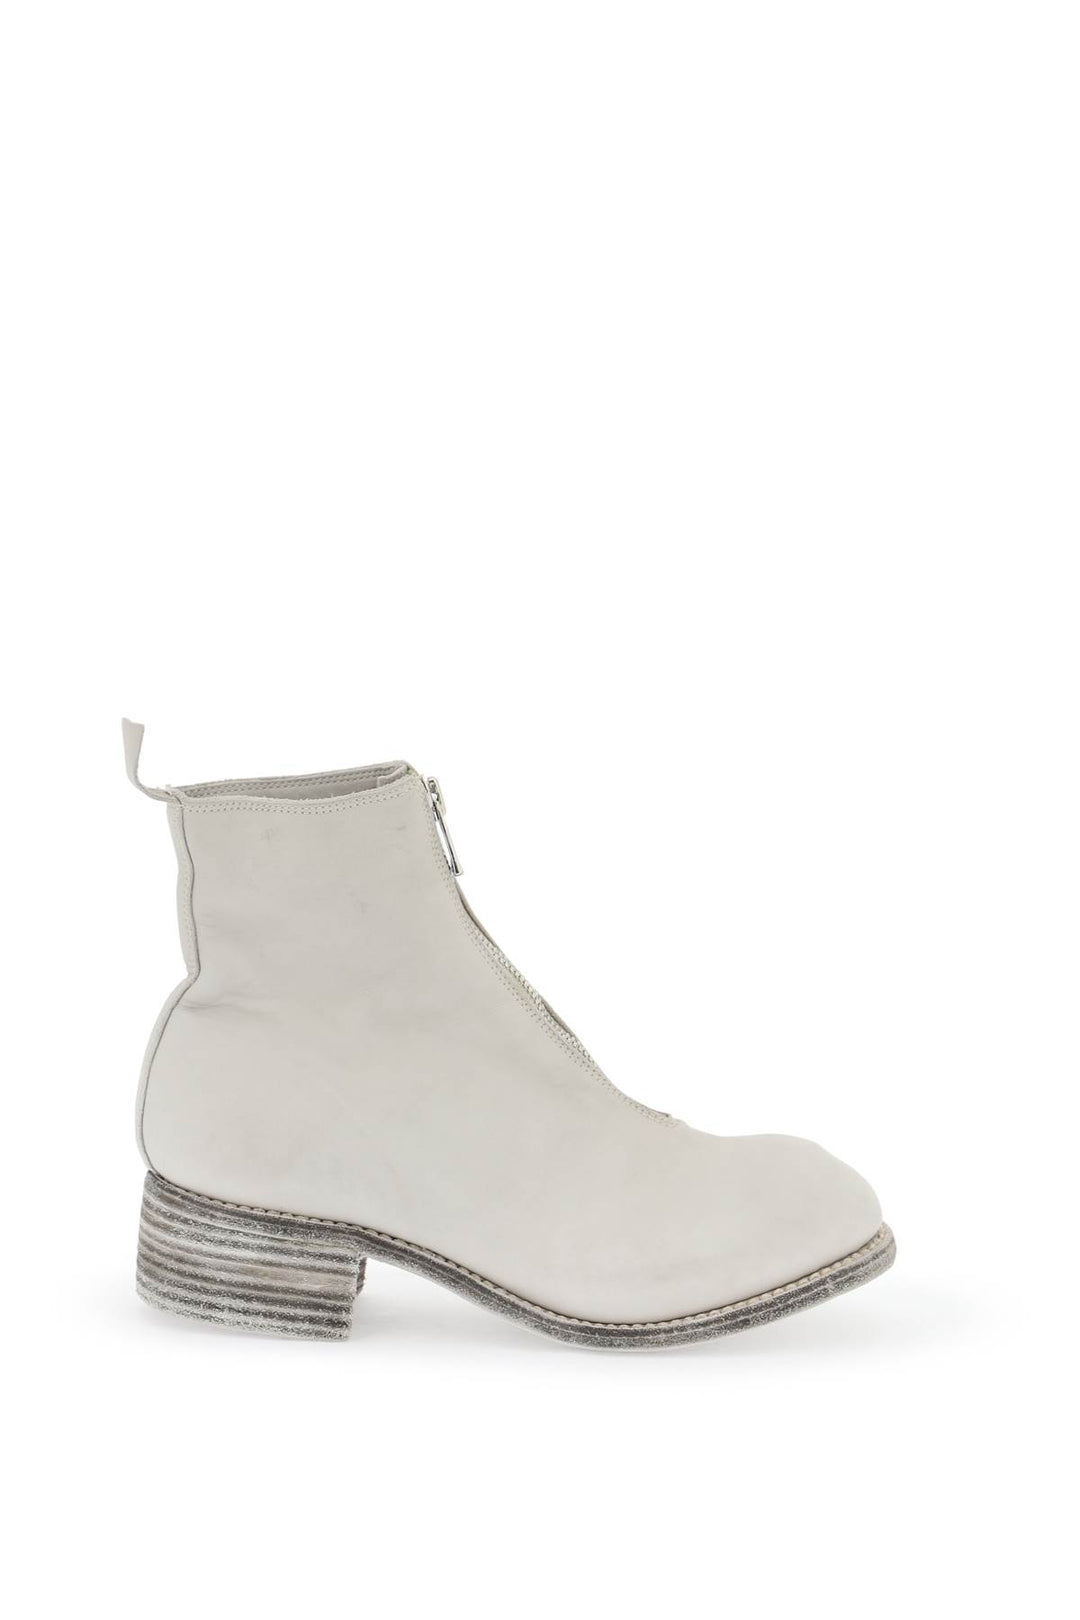 Guidi Front Zip Leather Ankle Boots   White